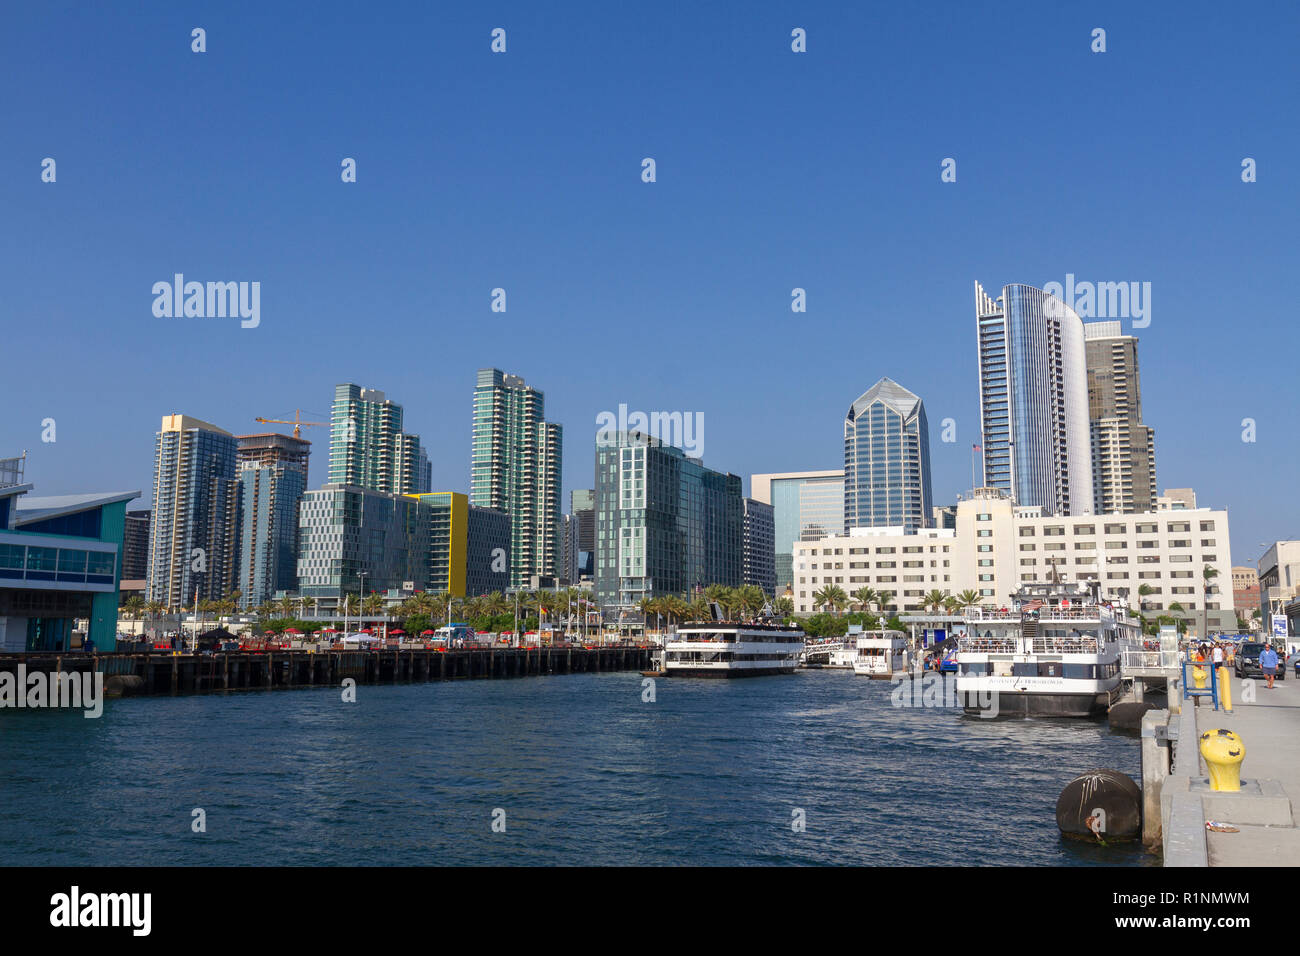 The skyline of downtown San Diego viewed from the waterfront, San Diego Bay, San Diego, California, United States. Stock Photo